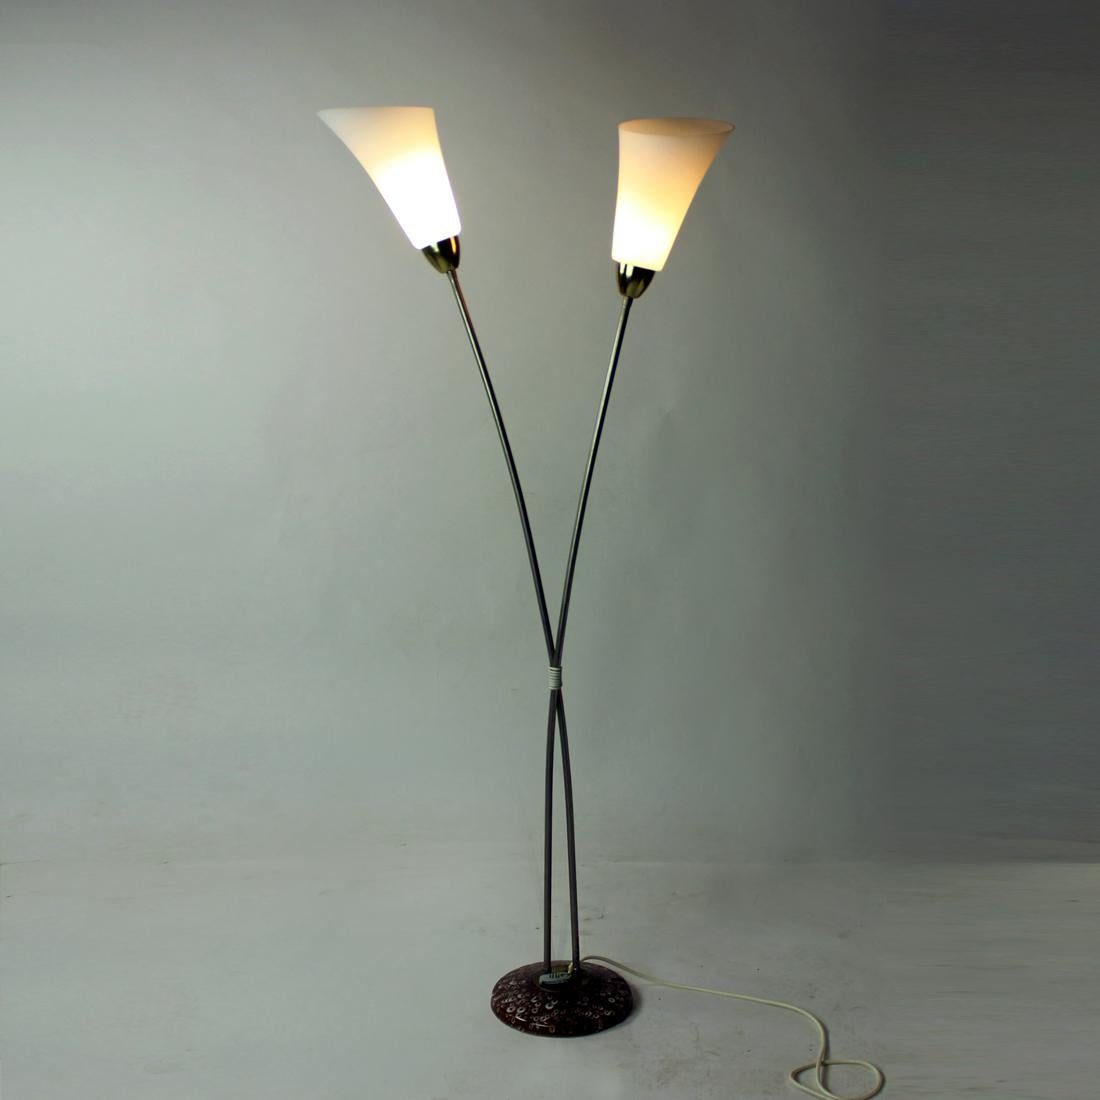 Great, iconic floor lamp produced in Czechoslovakia in 1960s by Kamenicky Senov company. The lamp stands on a ceramic base. Two metal rods are like stems of flowers raising high and are finished with flower like glass shields made of white matt